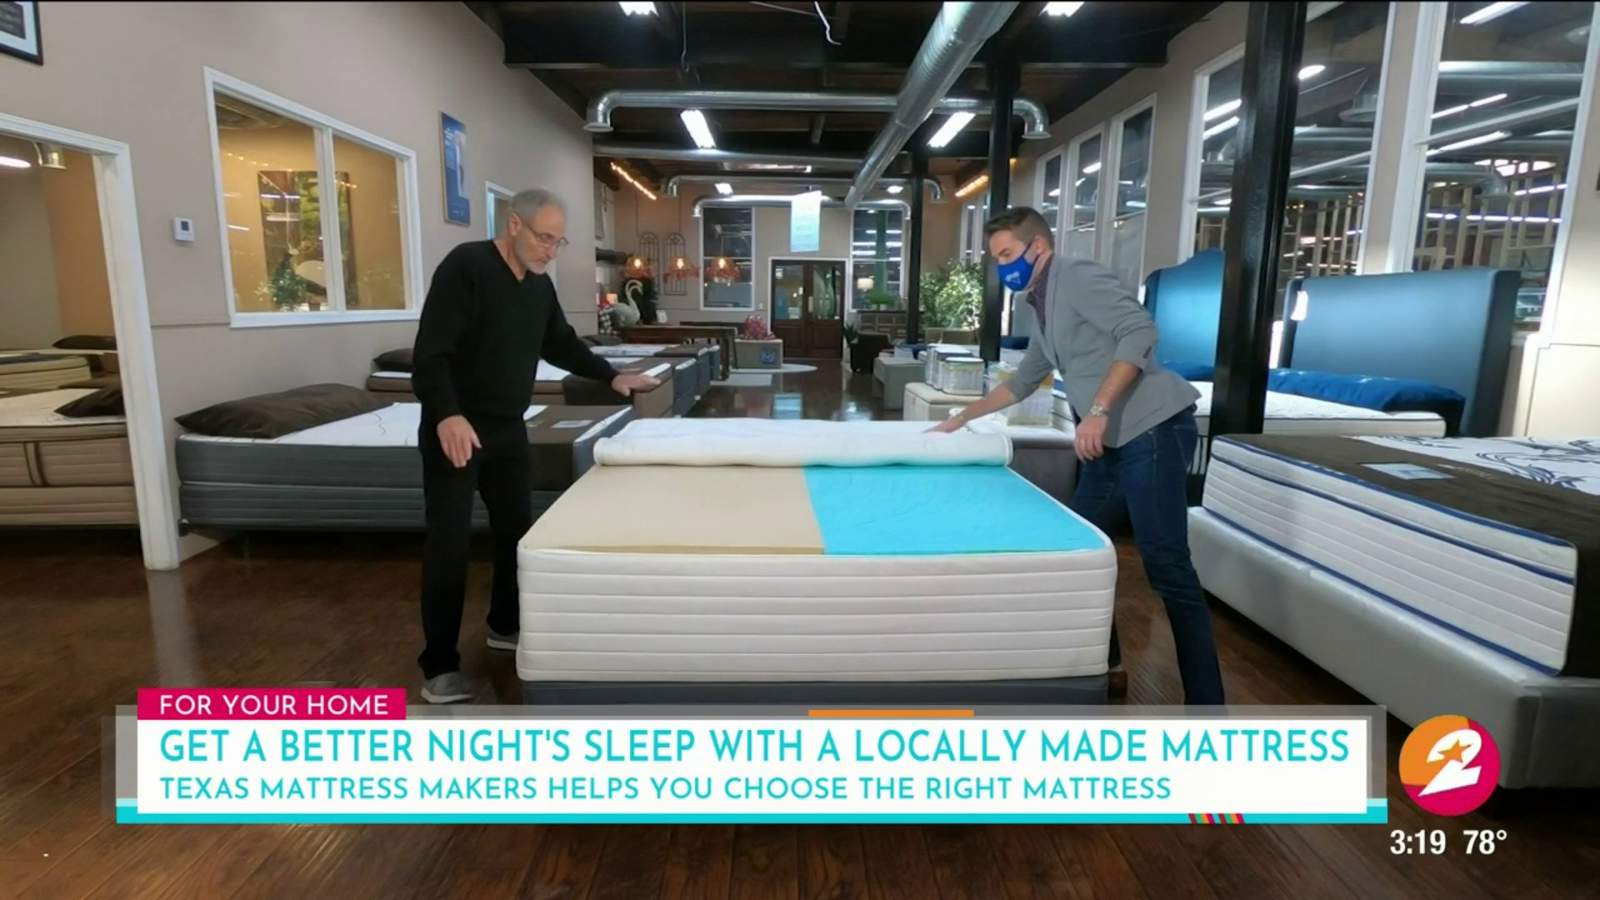 This custom mattress is the solution to a better night’s sleep